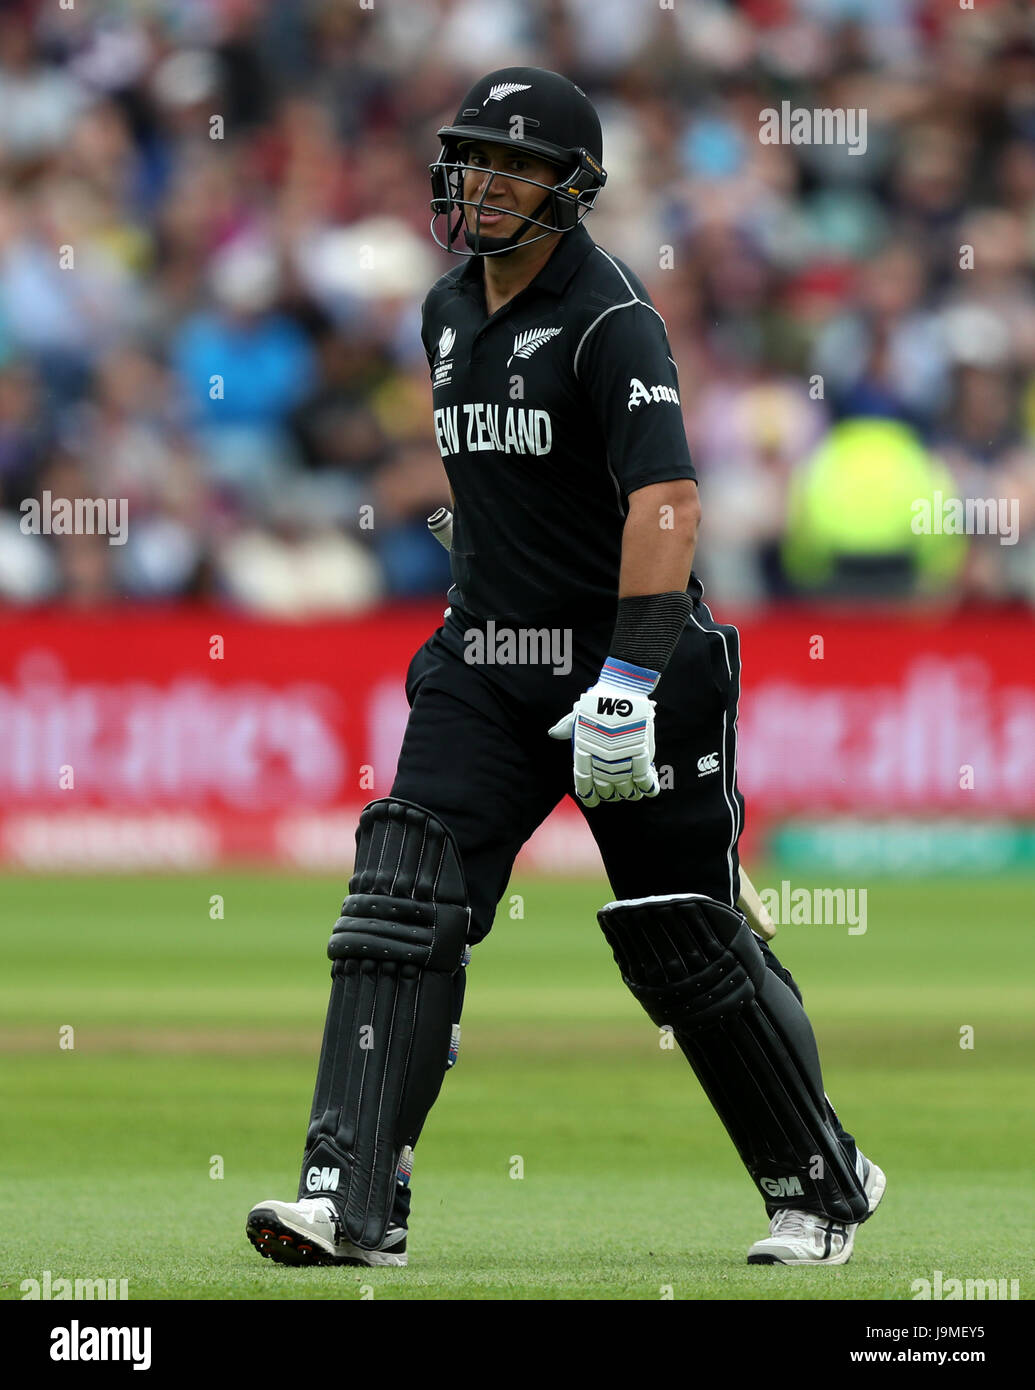 New Zealand's Ross Taylor walks off after being dismissed by Australia's John Hastings during the ICC Champions Trophy, Group A match at Edgbaston, Birmingham. Stock Photo